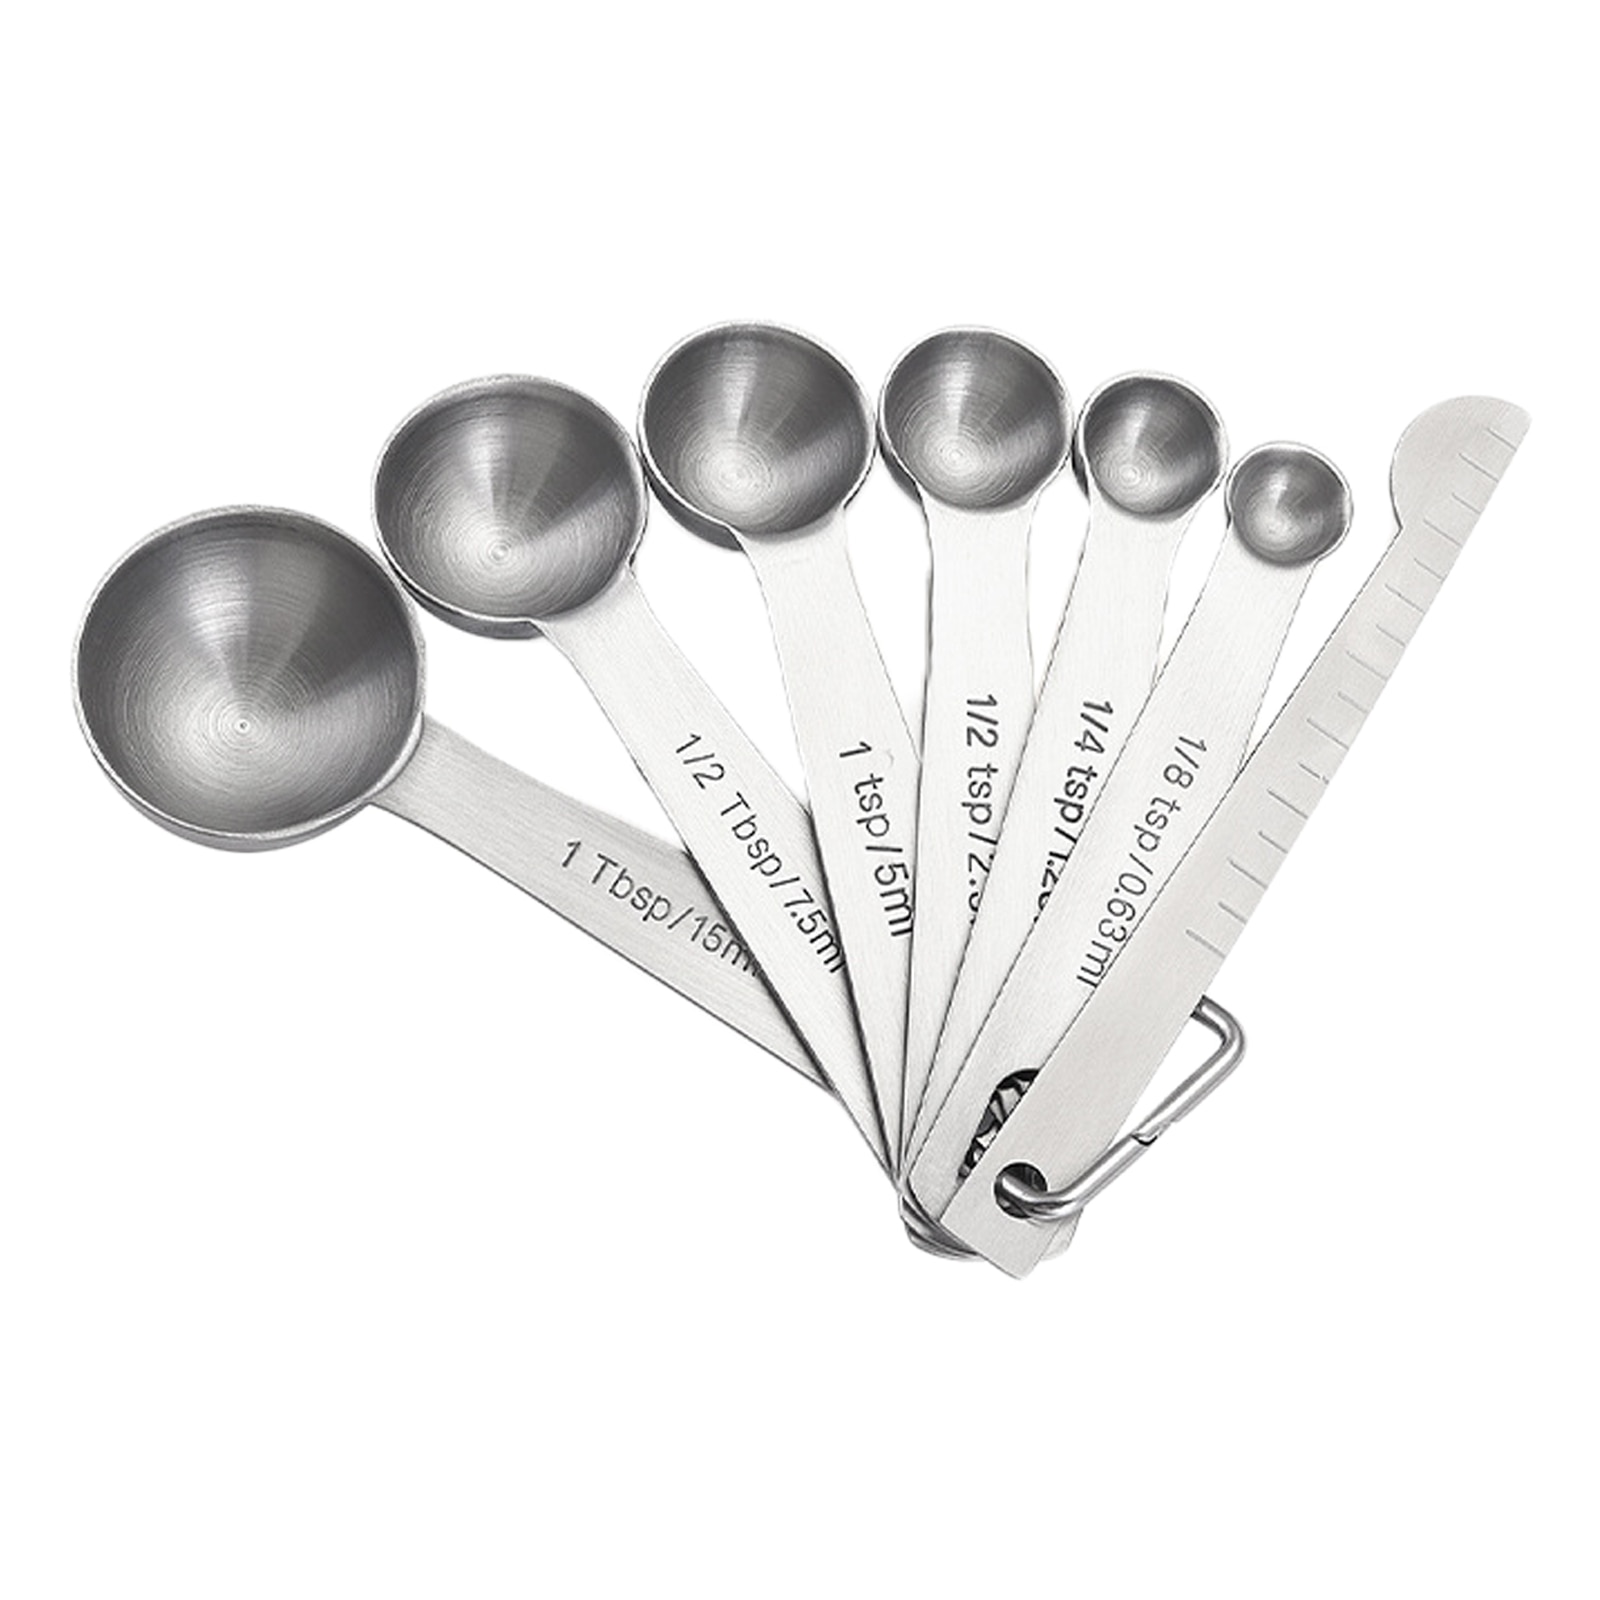 6 PCS Measuring Spoons Set with Measuring Ruler for Dry and Liquid Stainless Steel Heat Resistant Cookware Set Kitchen Gadgets